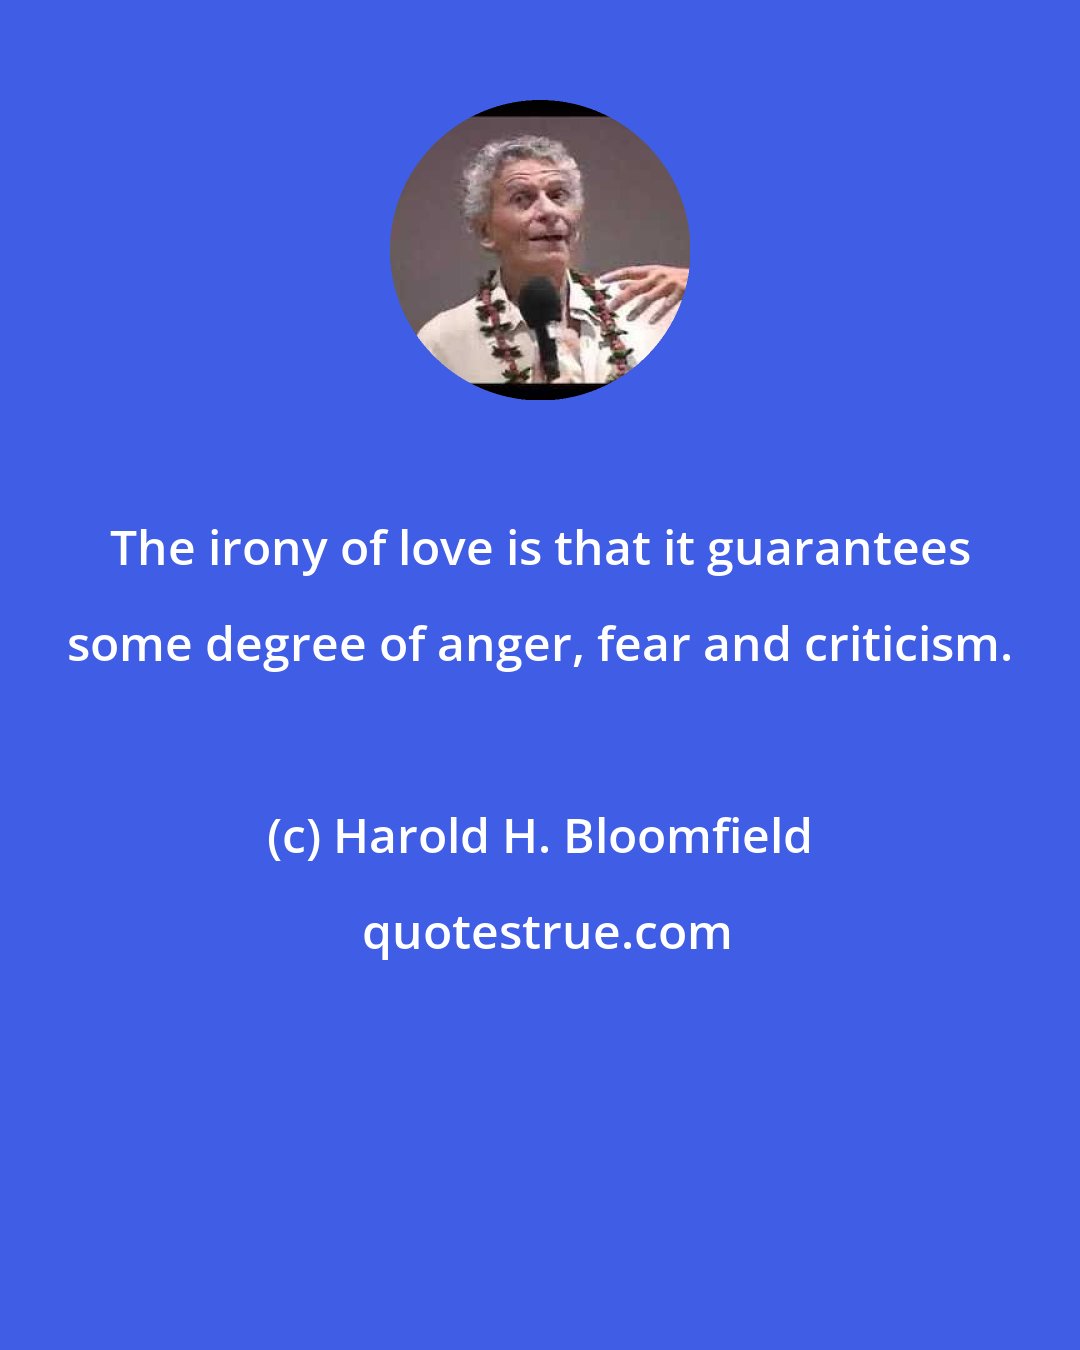 Harold H. Bloomfield: The irony of love is that it guarantees some degree of anger, fear and criticism.